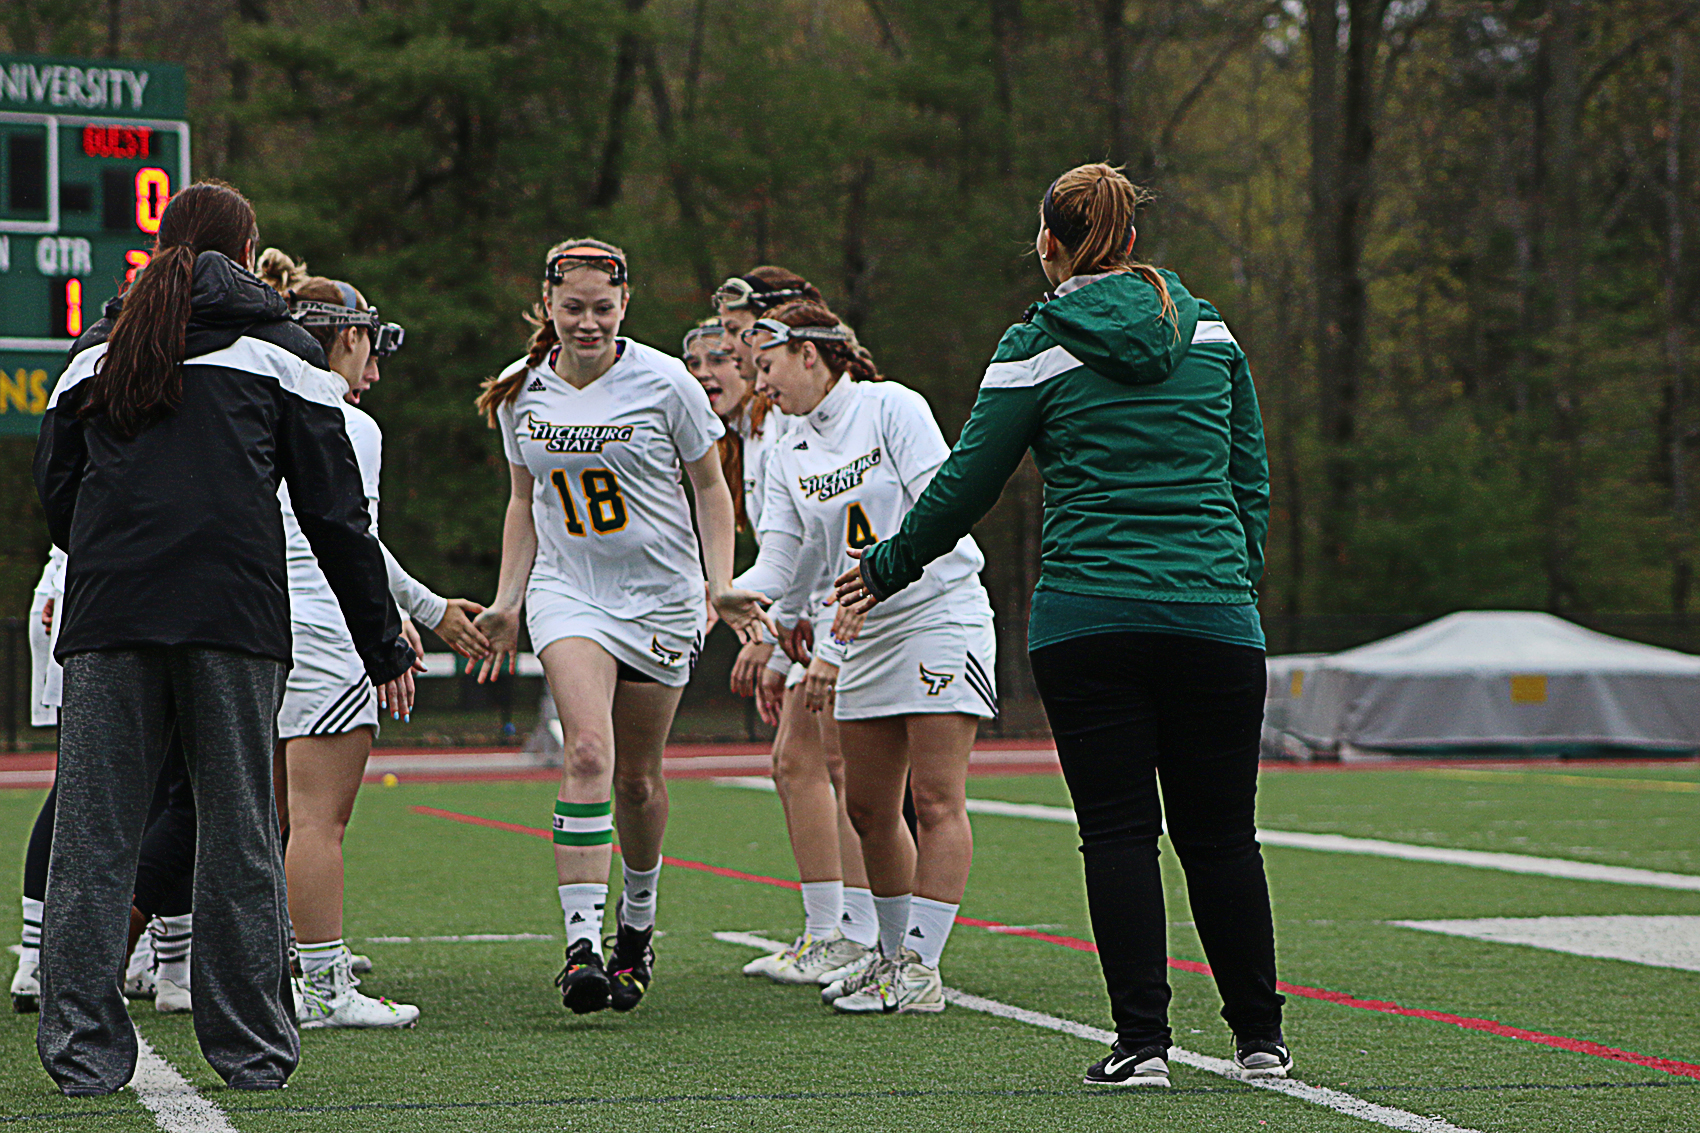 Fitchburg State Upended By Bridgewater State, 10-6